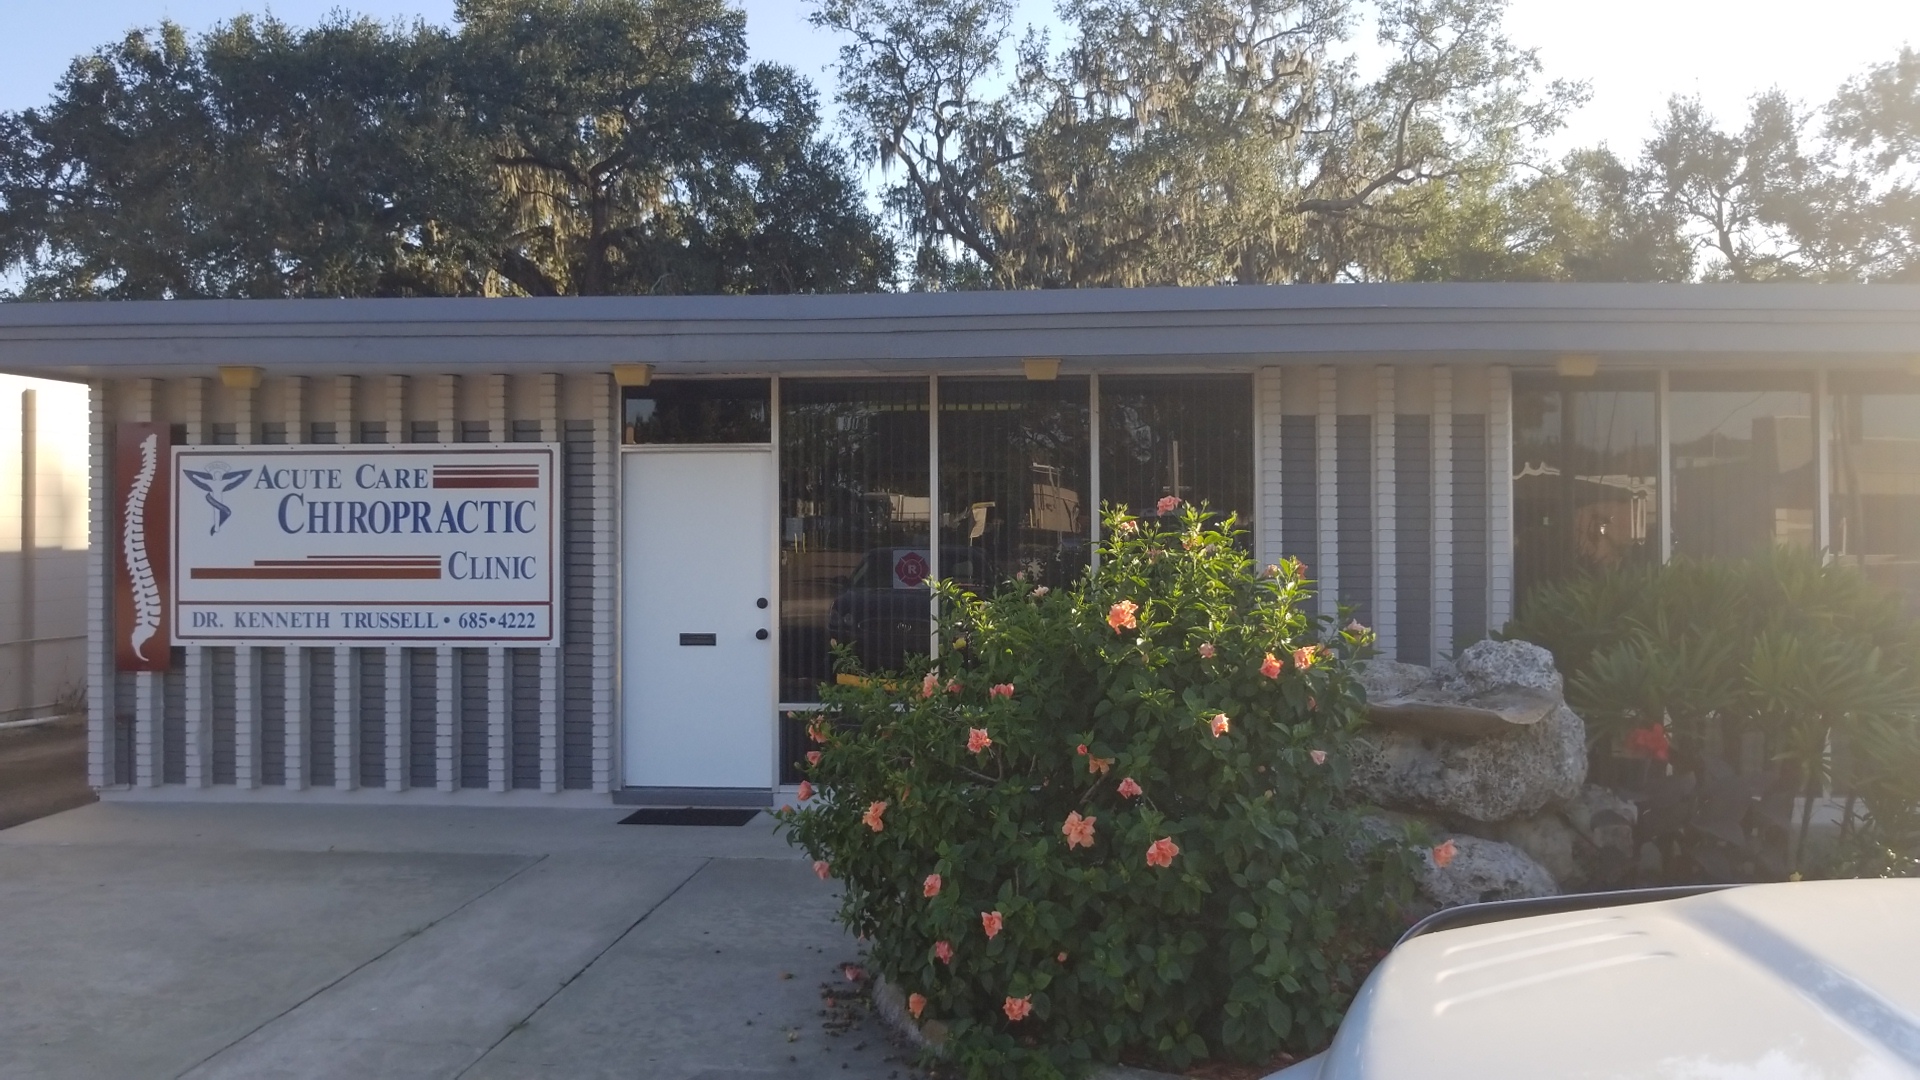 Acute Care Chiropractic Clinic